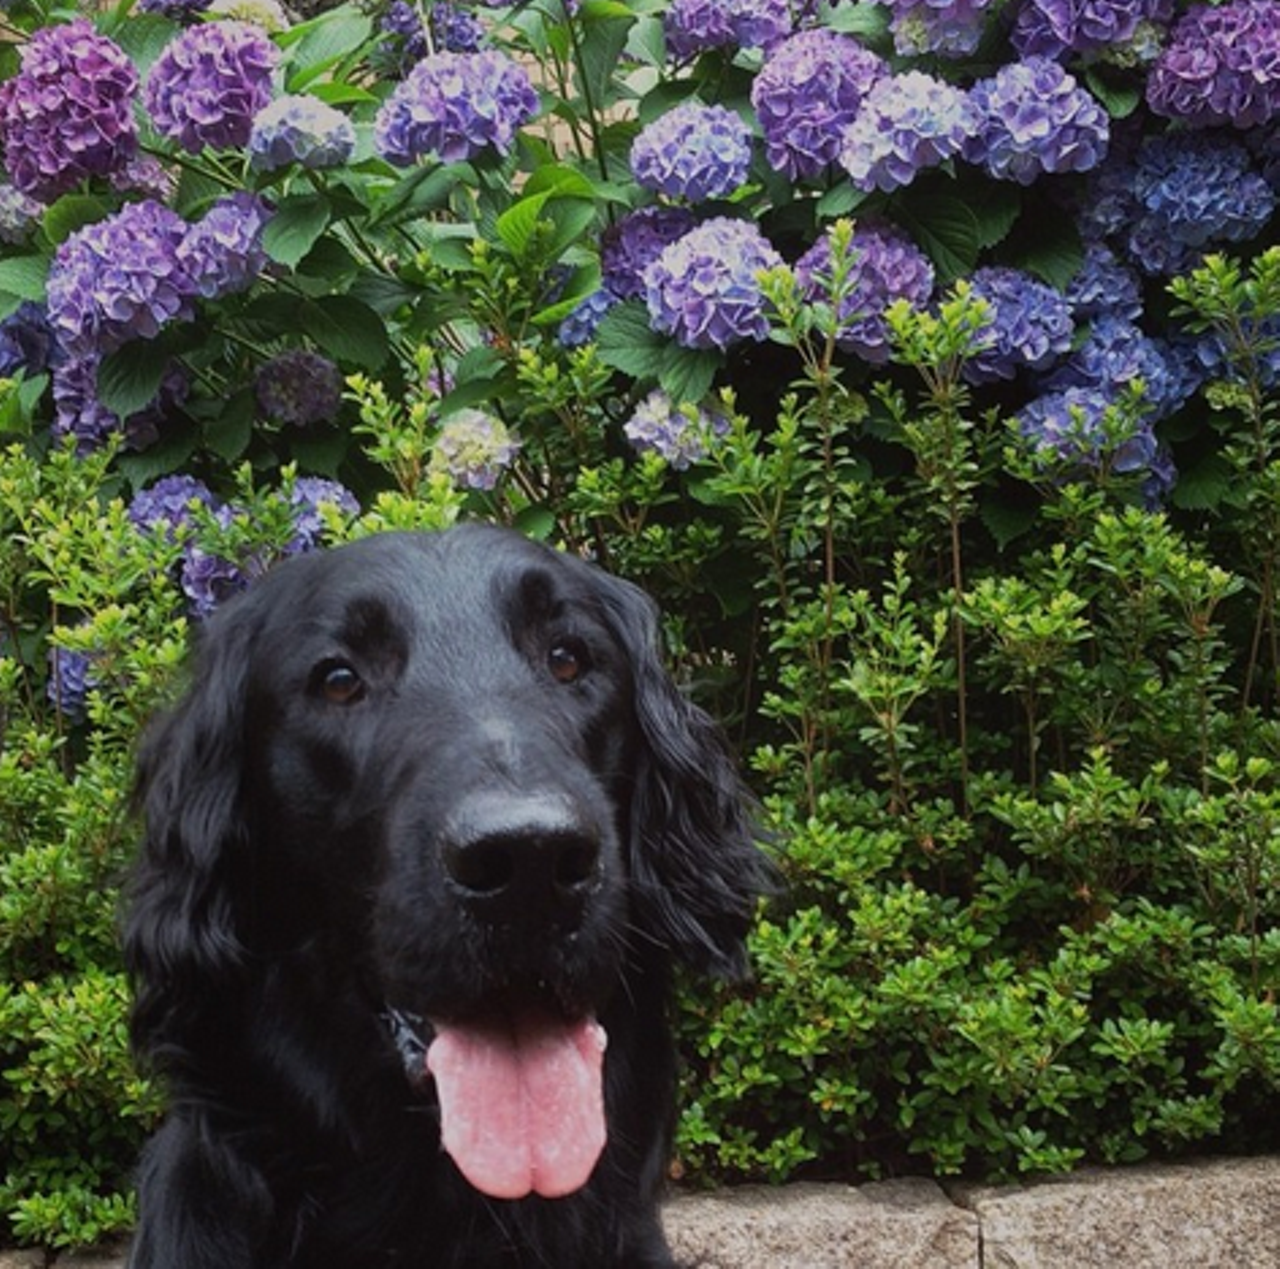 If you're looking for somewhere serene, frolic through the flowers with your pooch at Holden Arboretum. These botanical gardens are oftentimes a little more peaceful than a dog park.